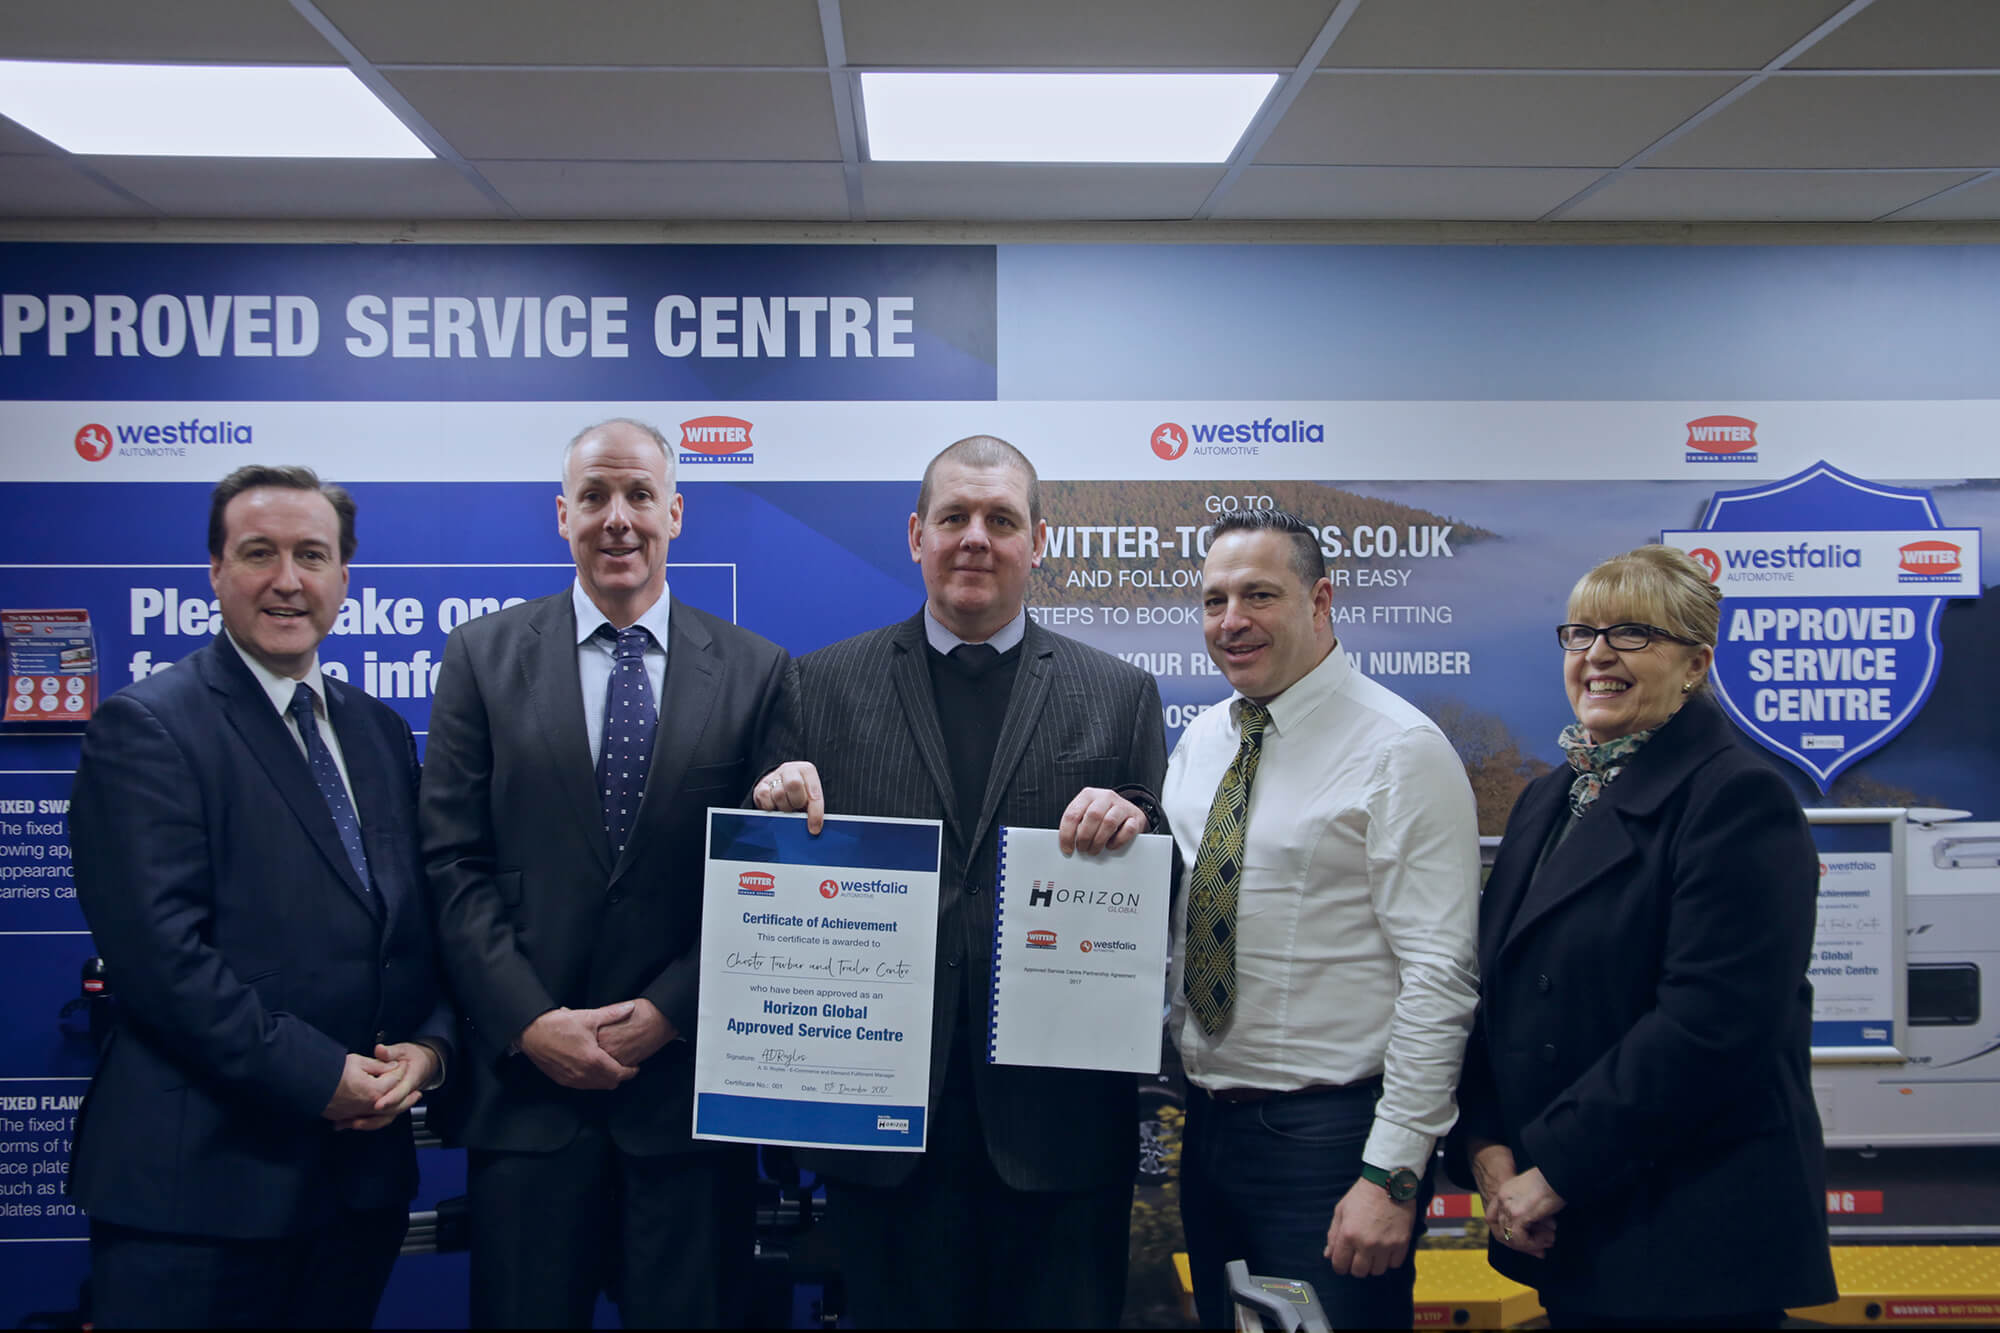 UK First for Chester Towbar and Trailer Centre